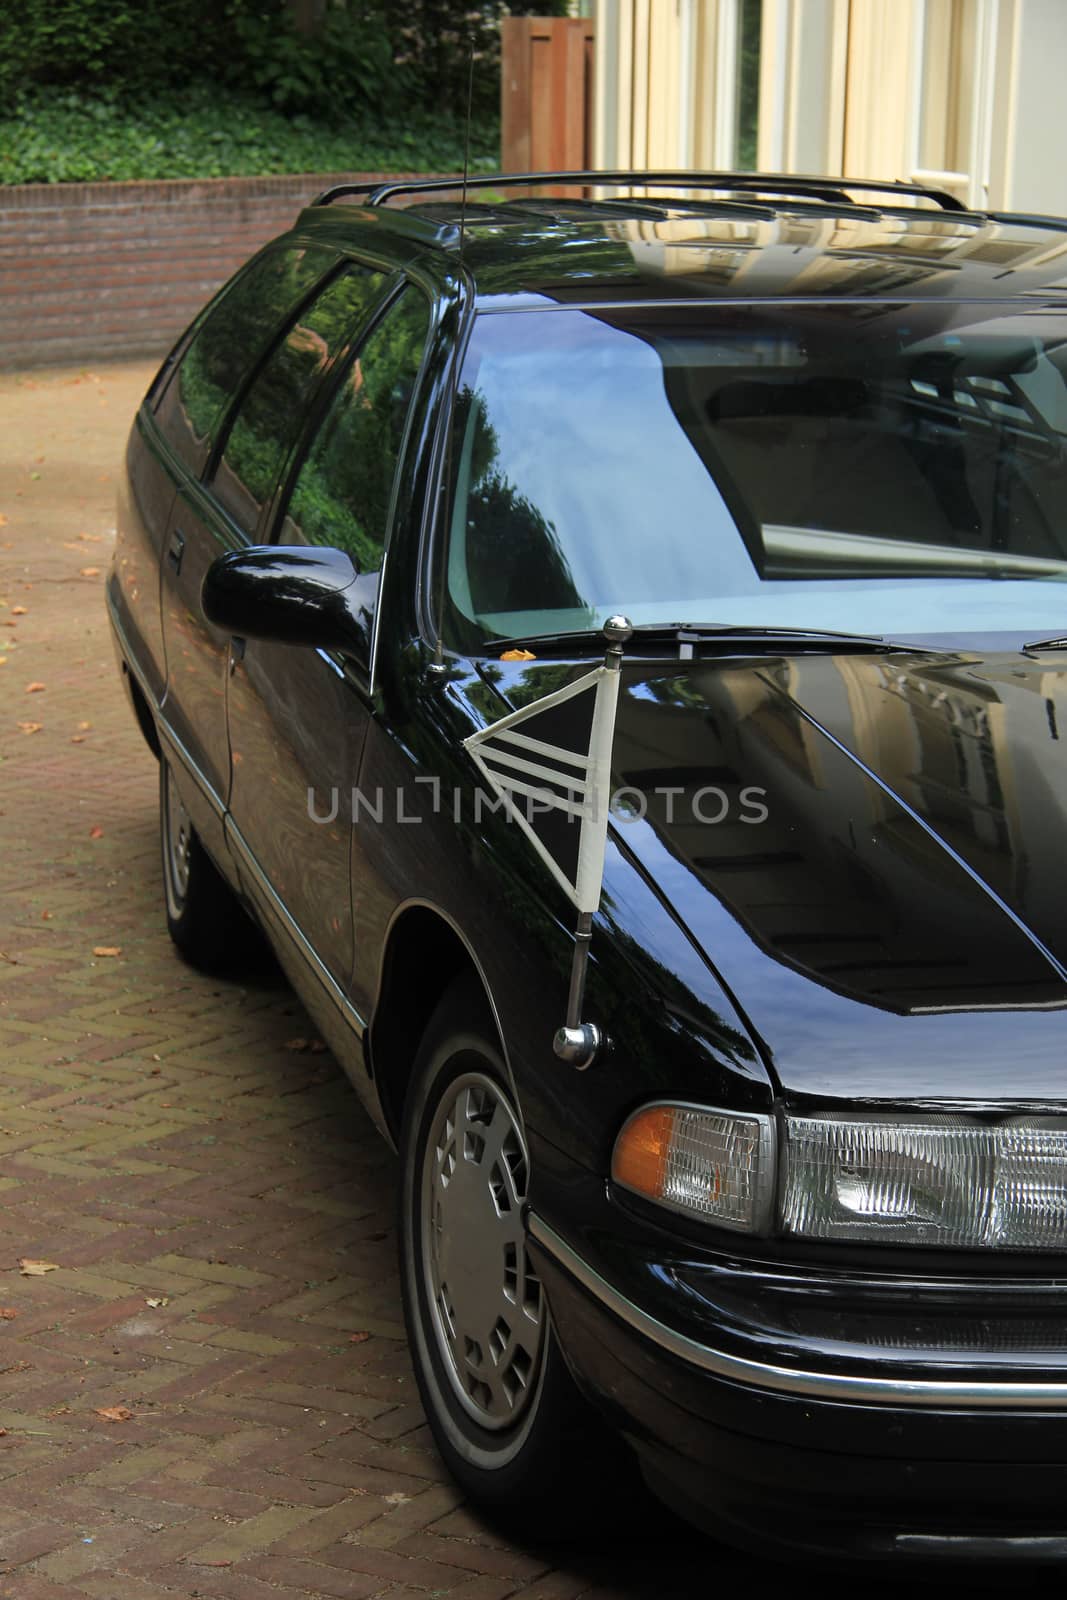 Black hearse, parked outside a funeral home